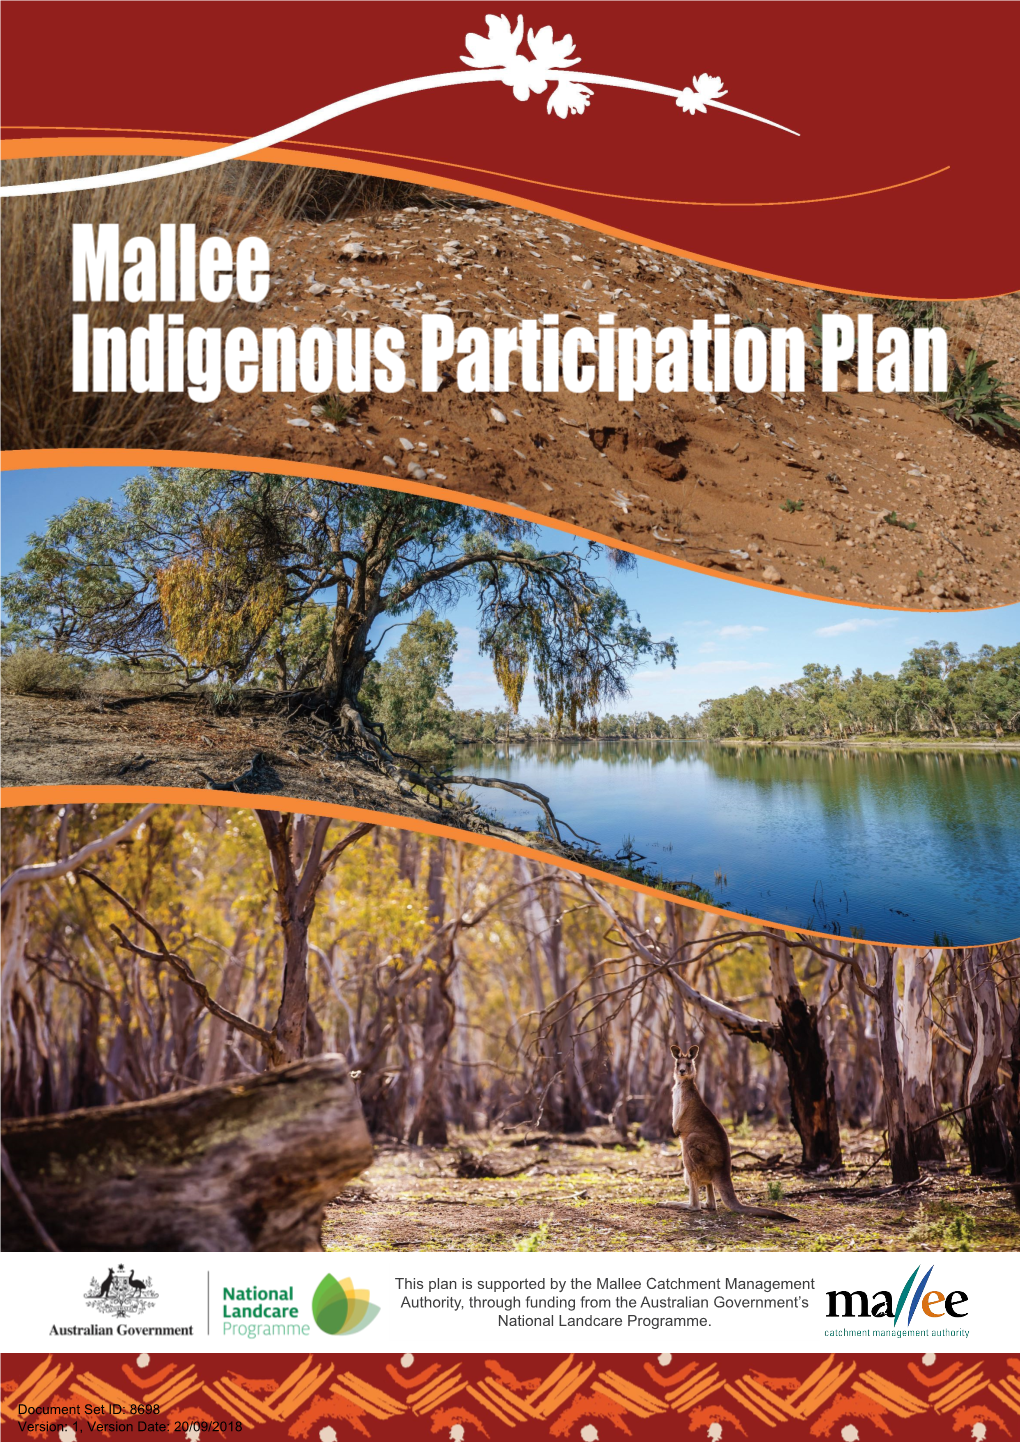 This Plan Is Supported by the Mallee Catchment Management Authority, Through Funding from the Australian Government's National